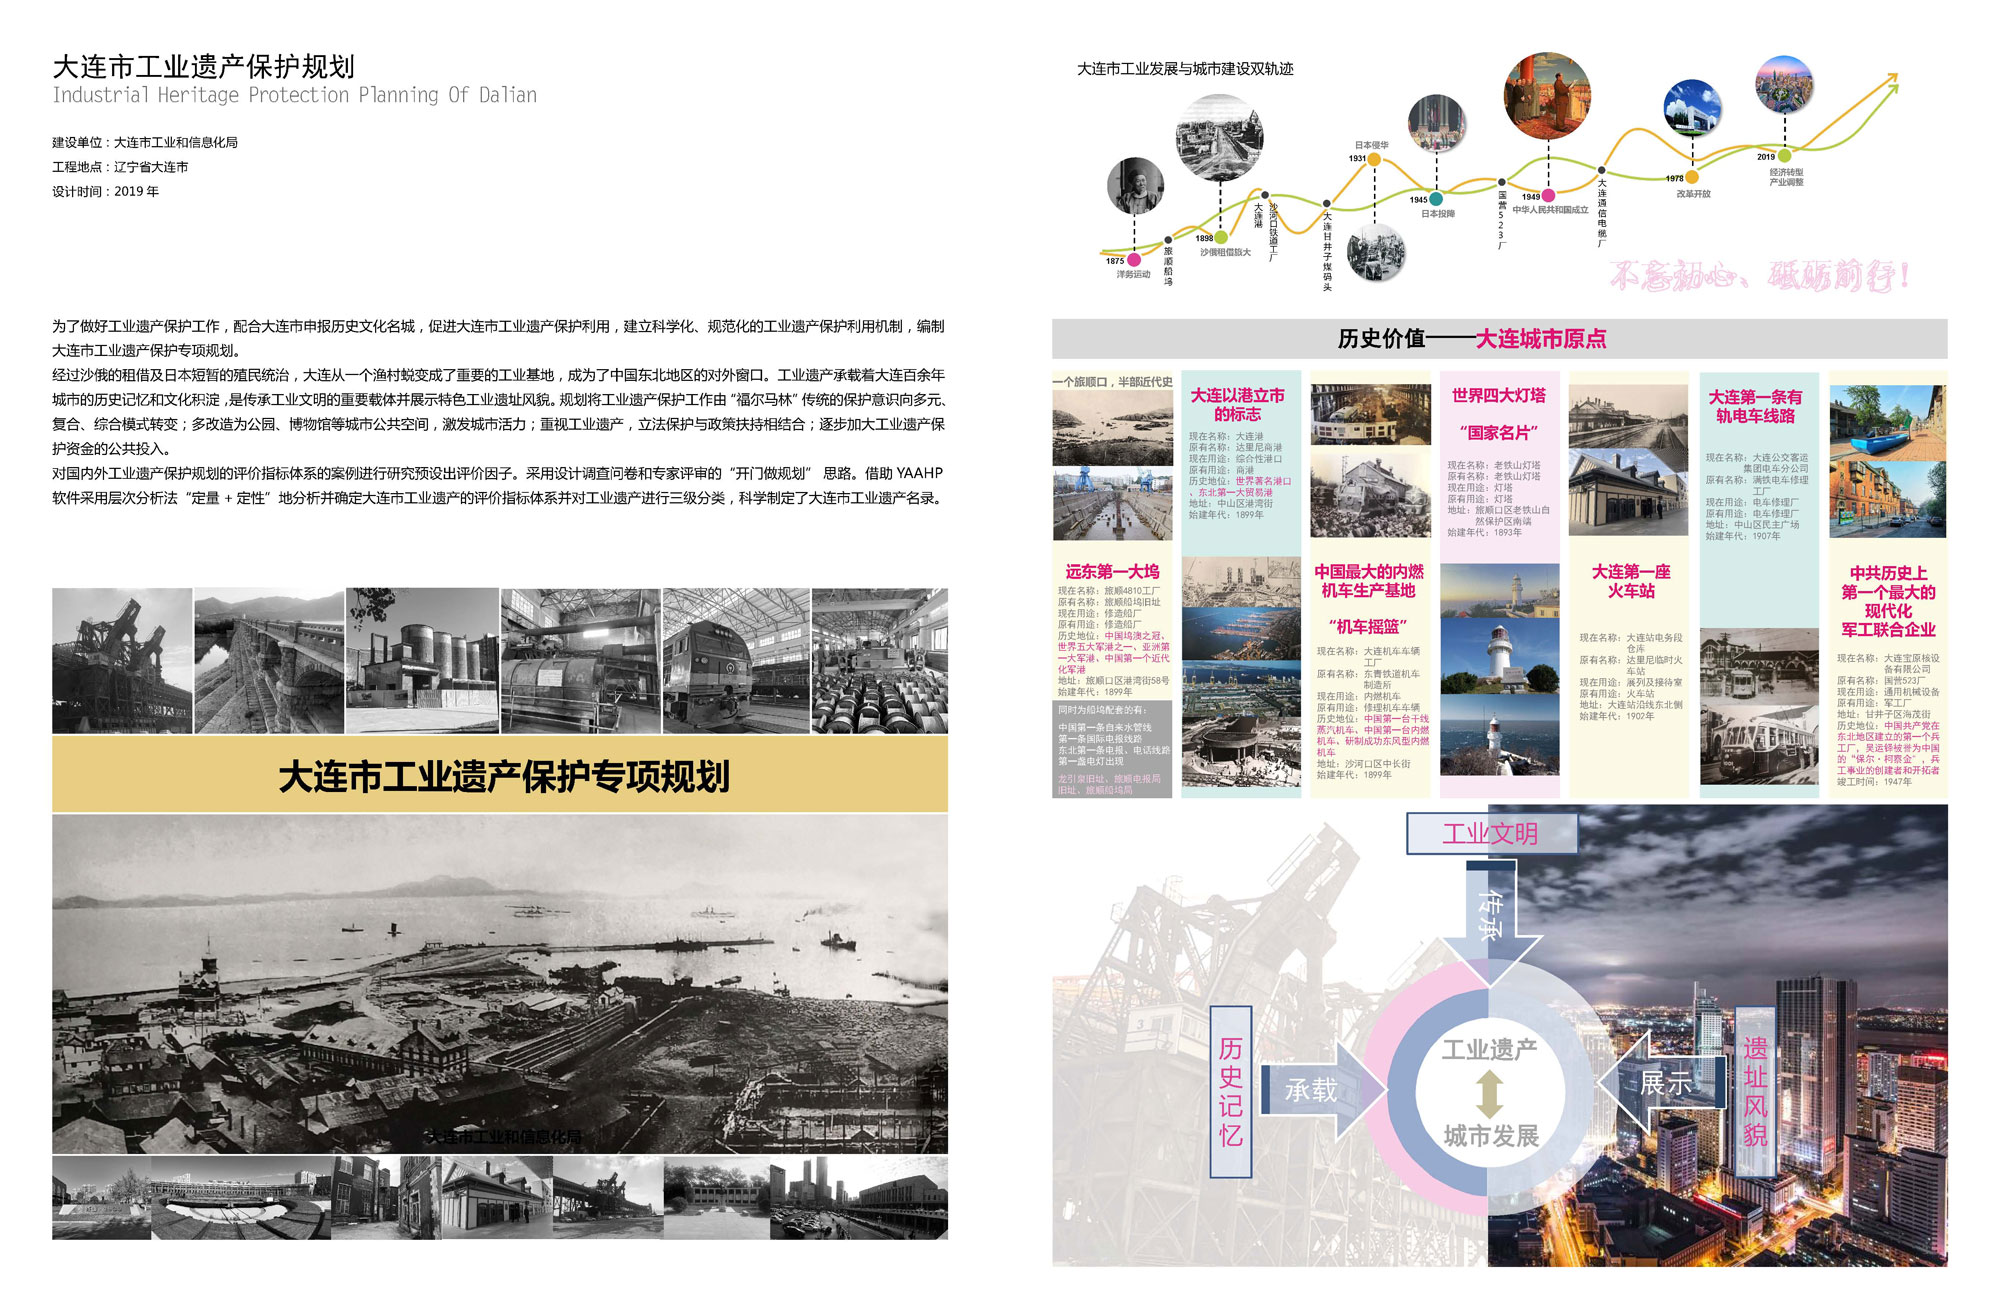 Dalian Industrial Heritage Protection Planning